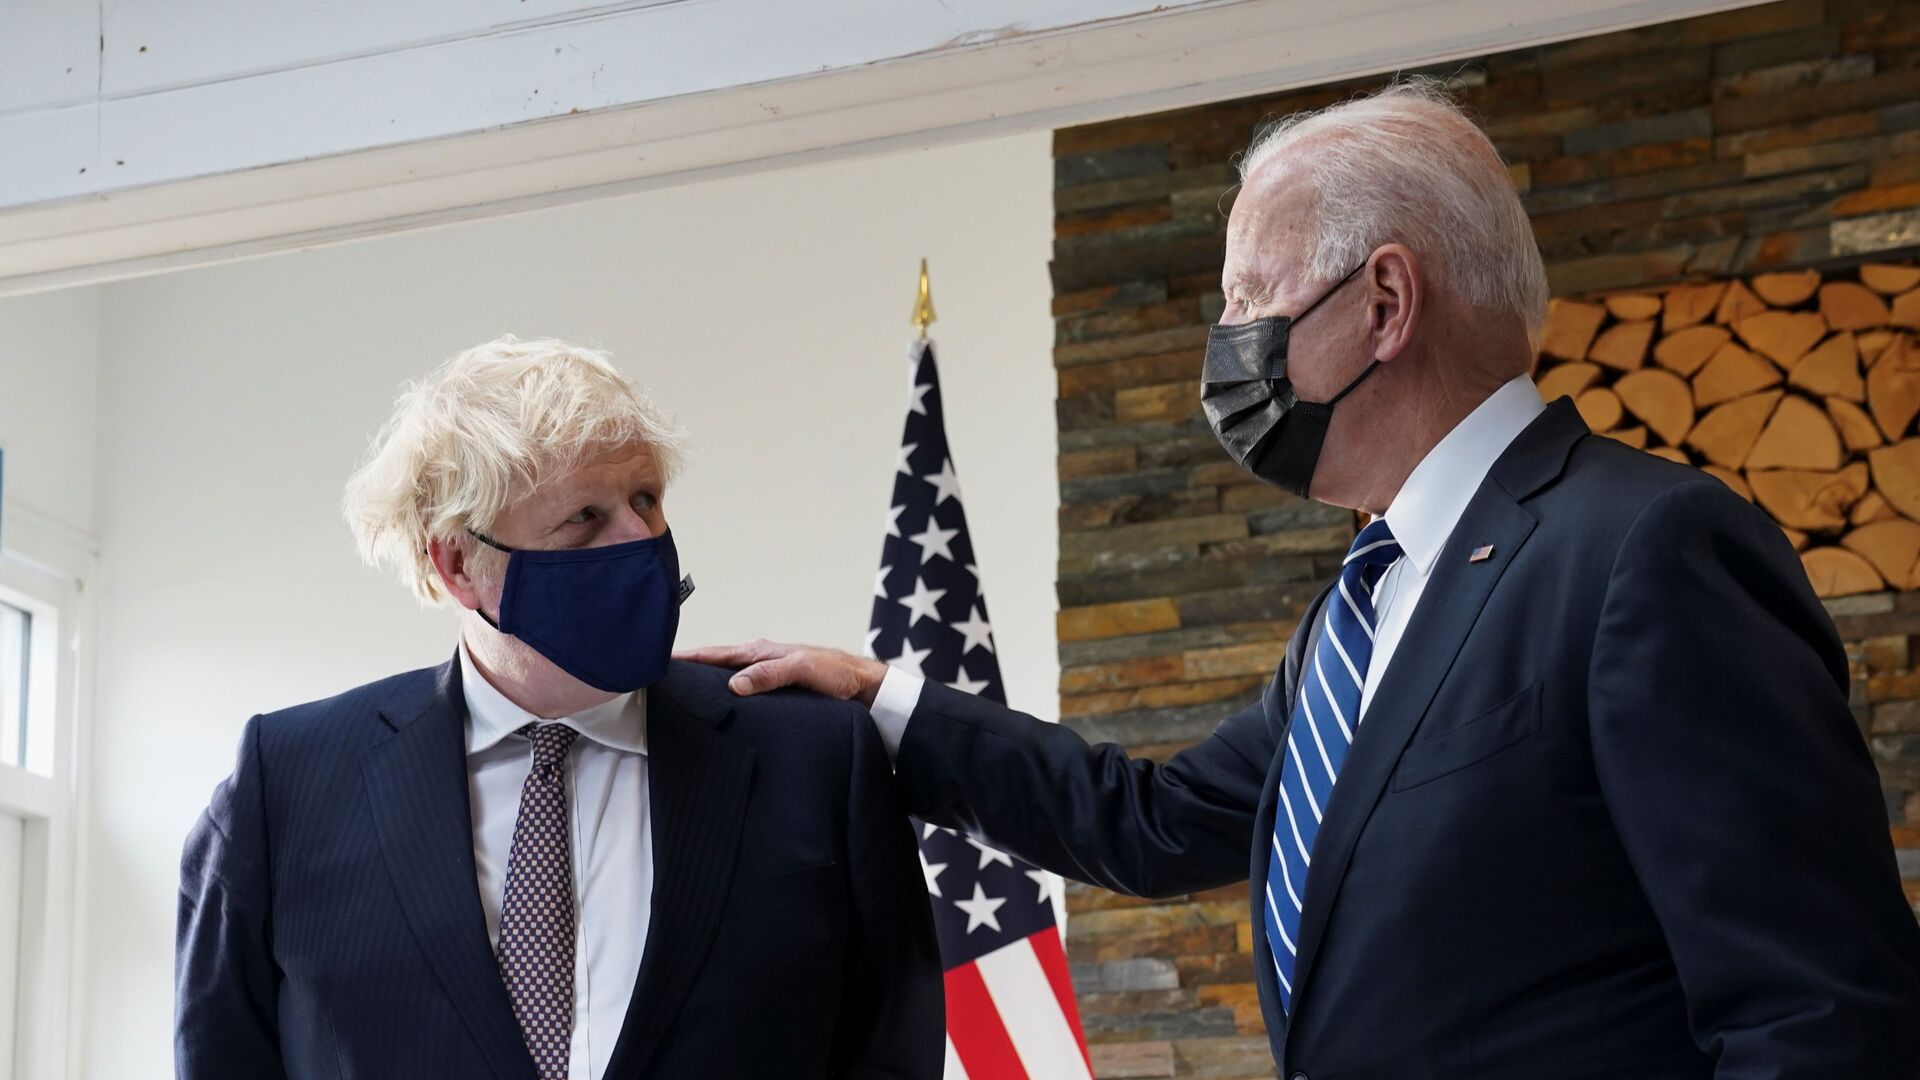 U.S. President Joe Biden speaks with Britain's Prime Minister Boris Johnson, as they look at historical documents and artefacts relating to the Atlantic Charter during their meeting, at Carbis Bay Hotel, Carbis Bay, Cornwall, Britain June 10, 2021  - Sputnik International, 1920, 13.09.2021